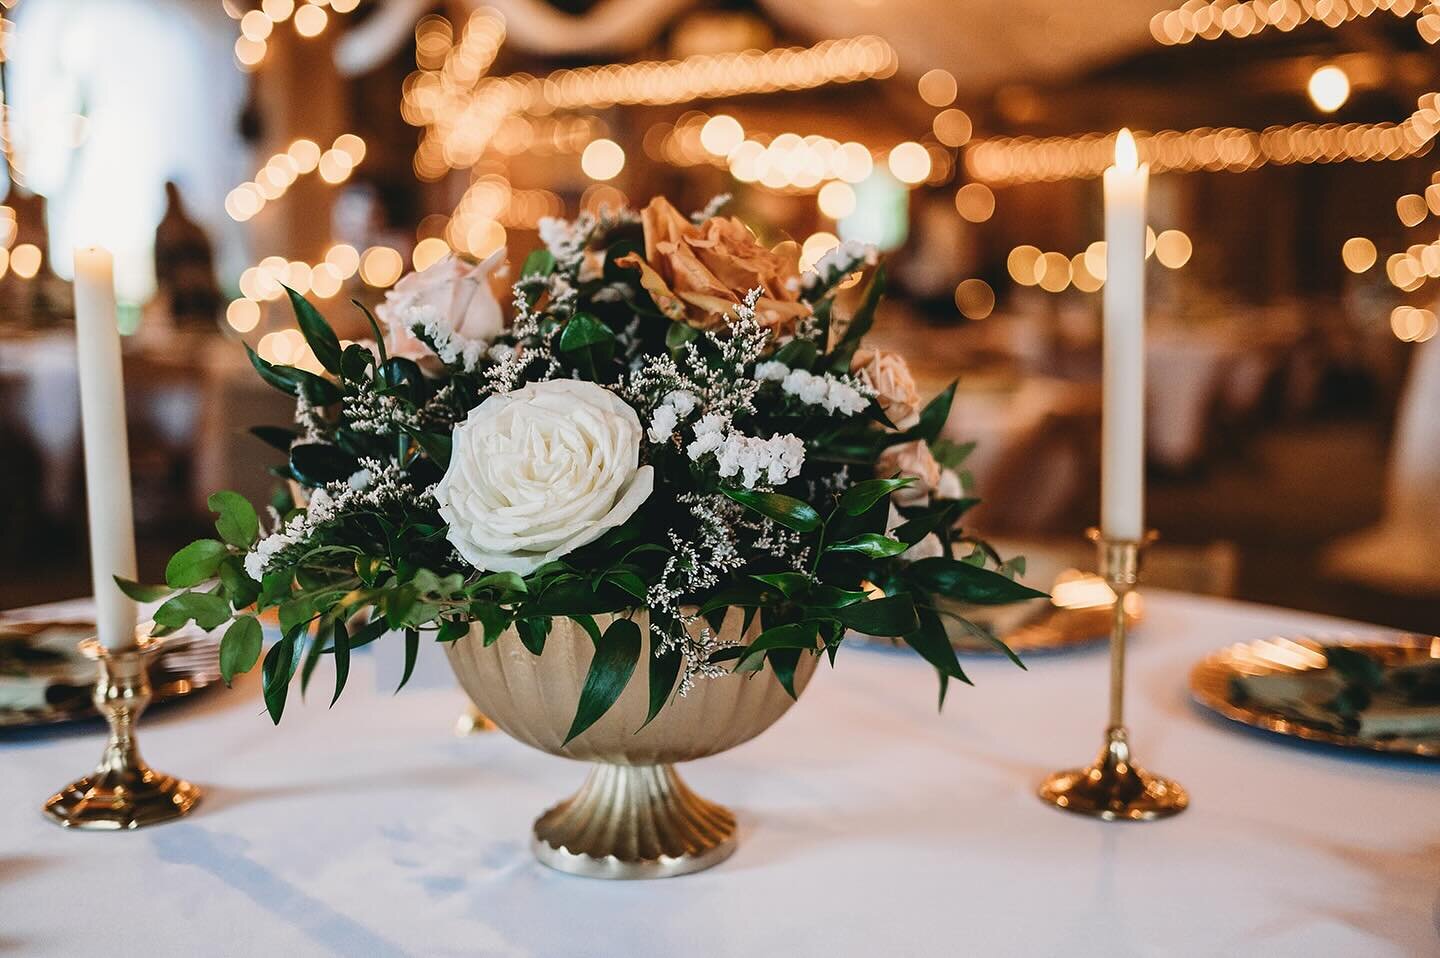 We love the compote bowl this is a versatile floral design component. Low enough for people to see over but stunning! We recommend mixing these in to your over all design. But! Not all compote arrangements are equal so we always make sure to make imp